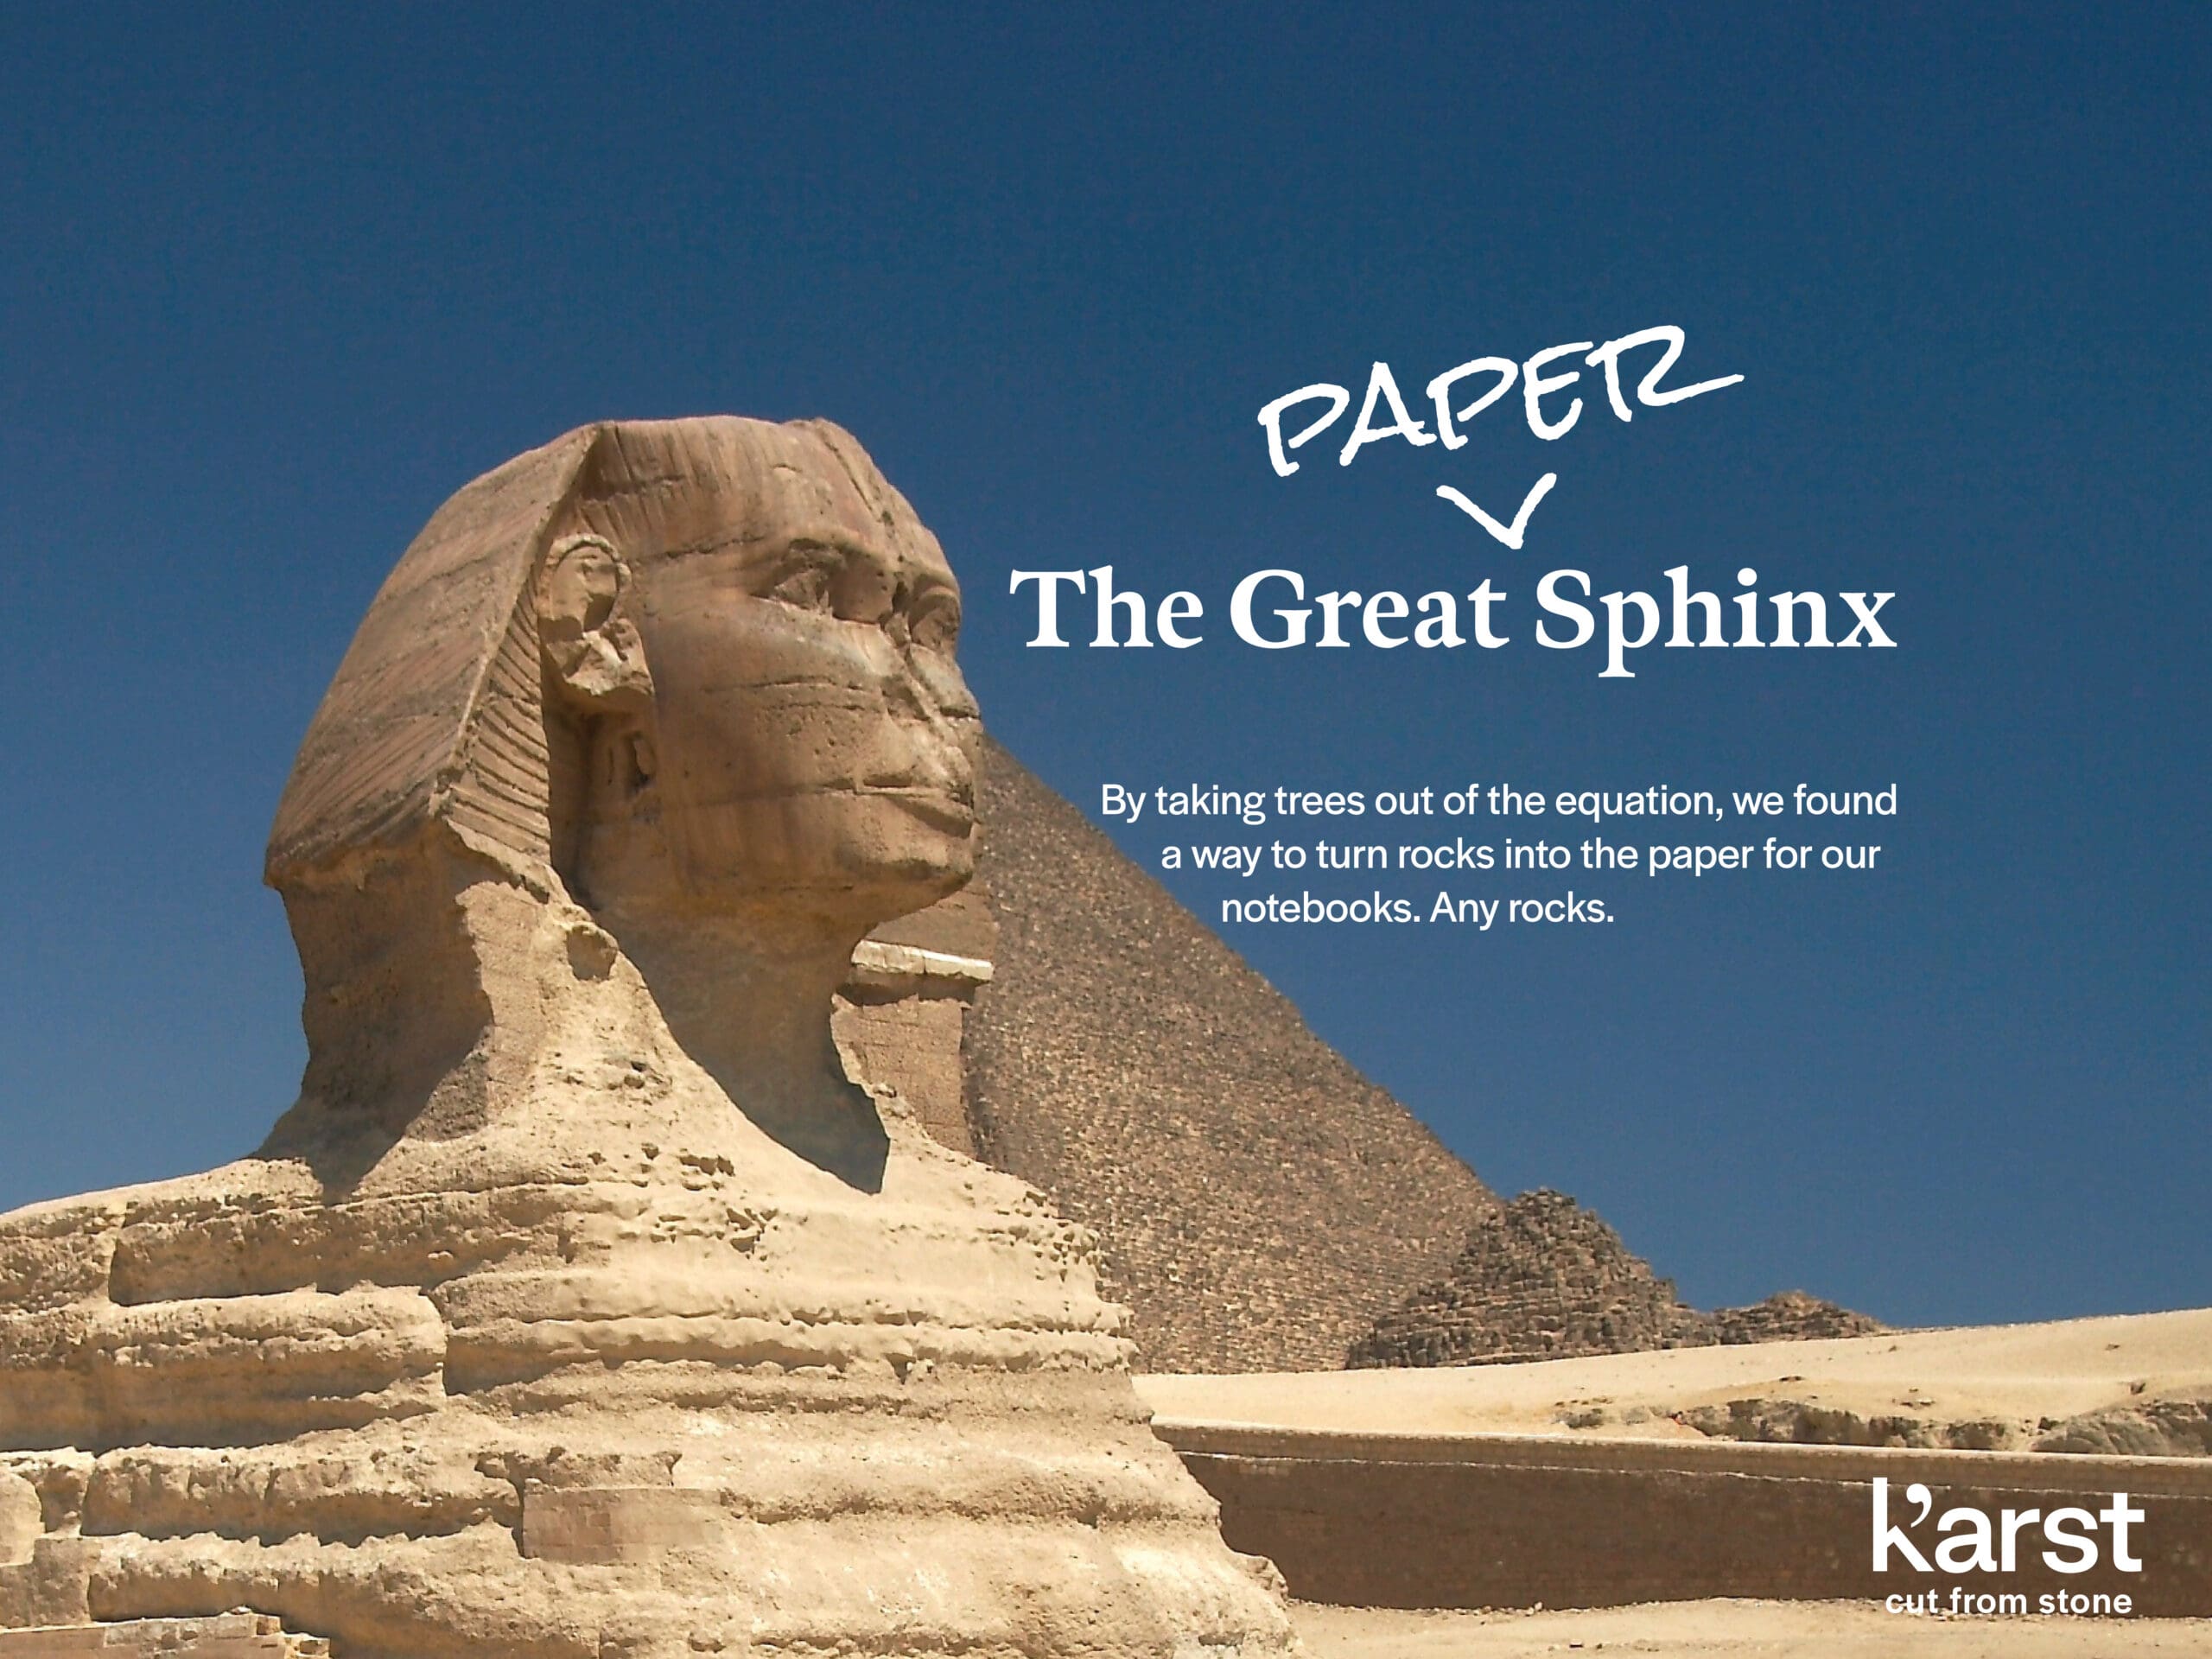 Photo of the Great Sphinx with white text that says "The Great Paper Sphinx"